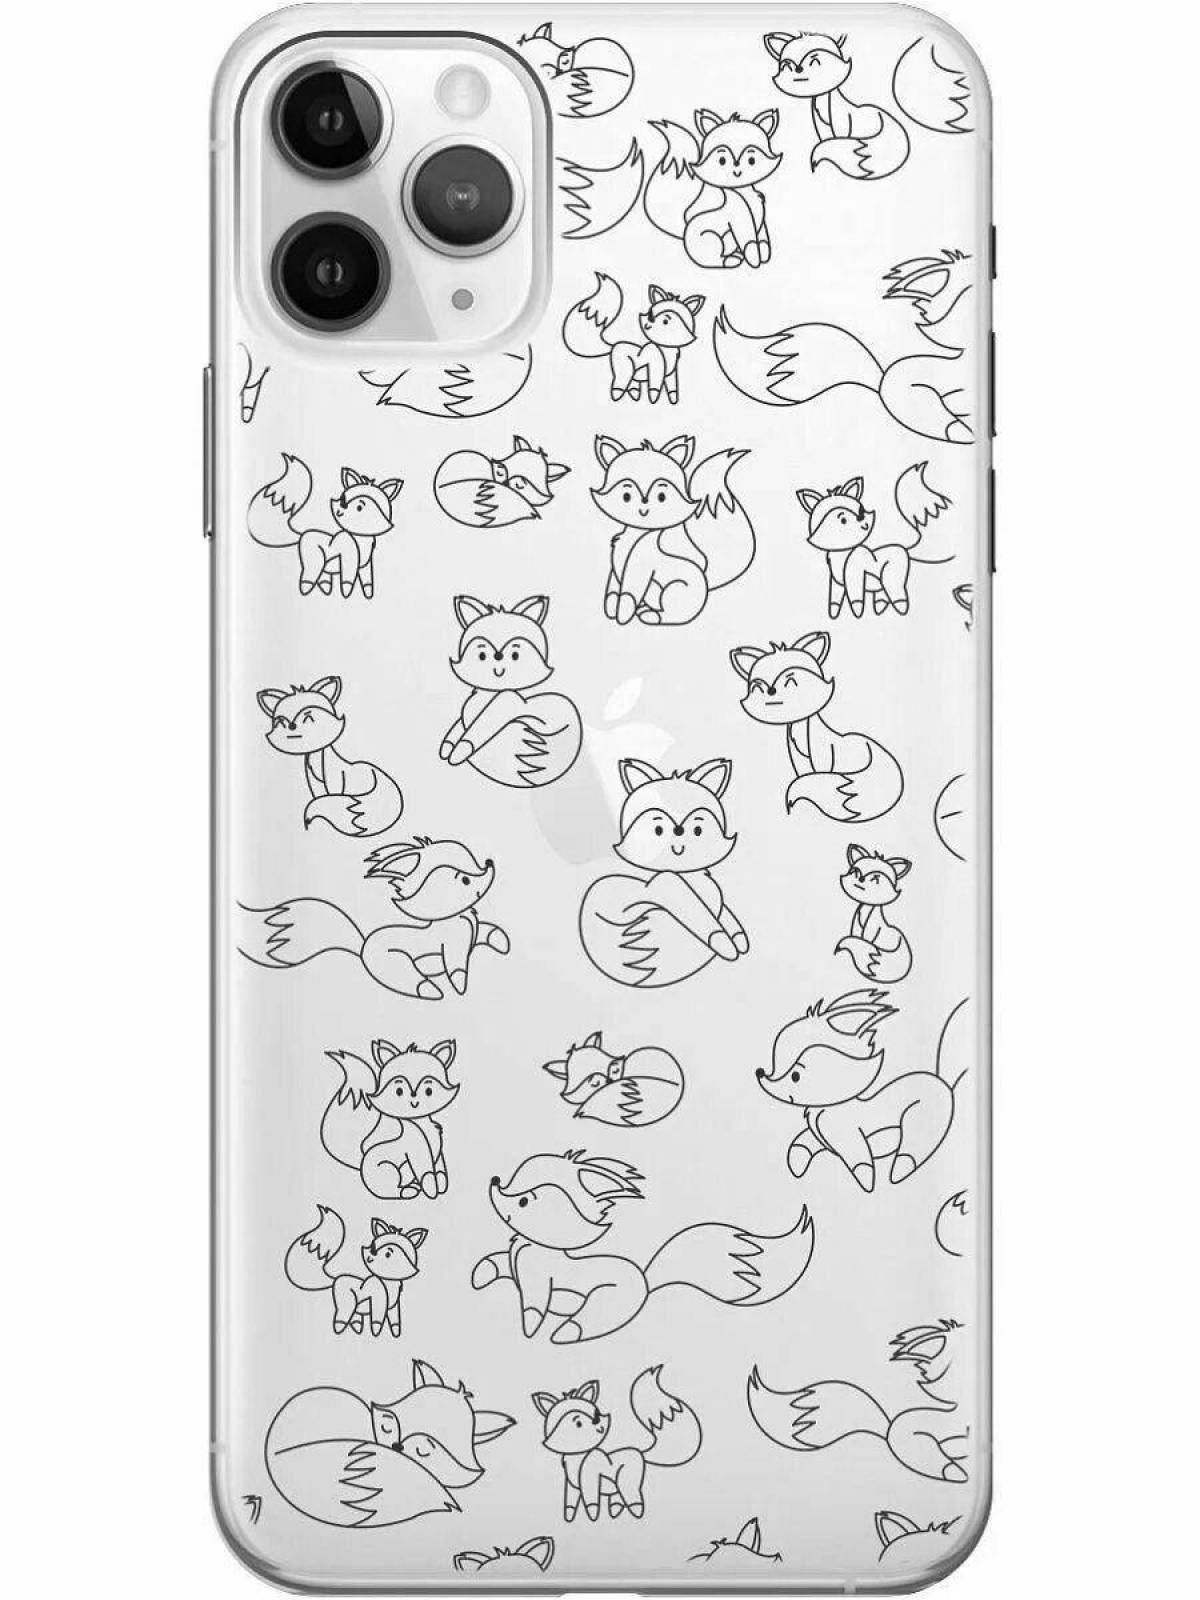 Coloring book with colorful phone case design